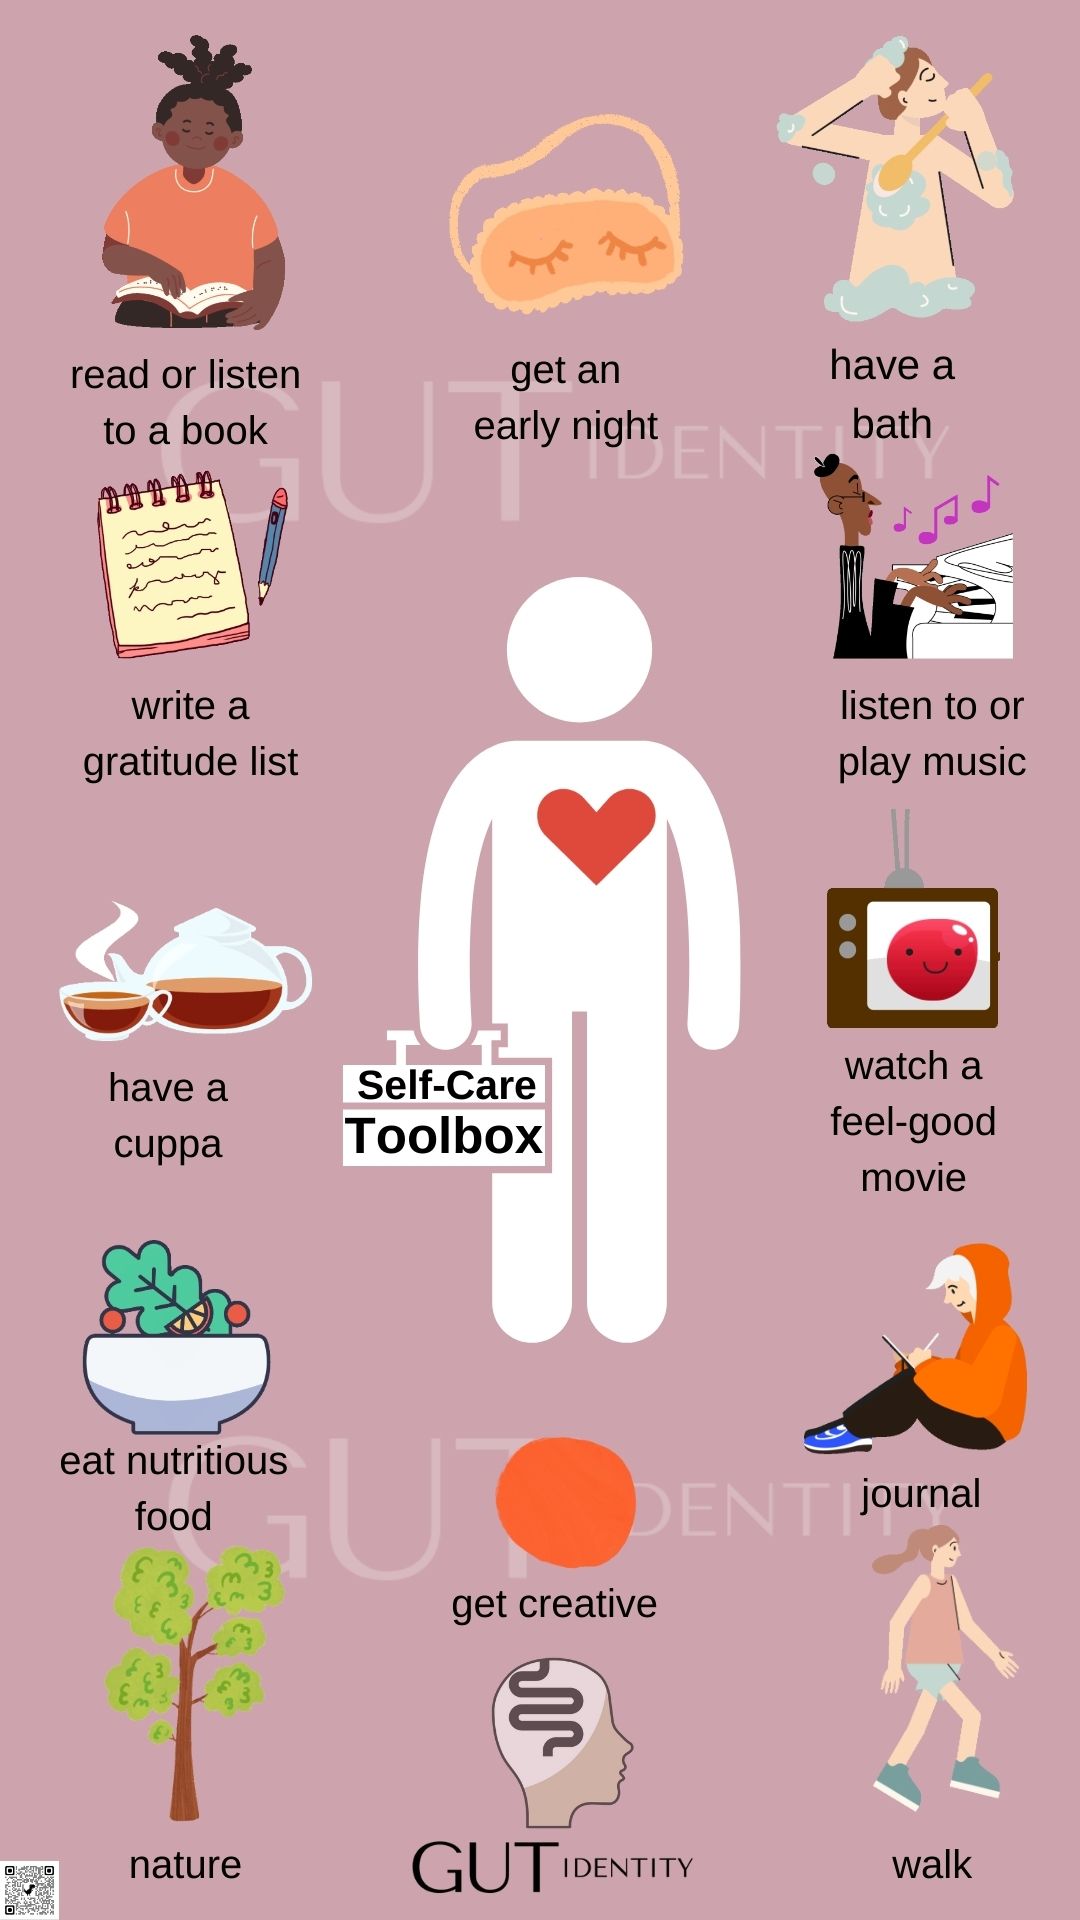 Ideas on how to create a self-care toolbox by Gutidentity